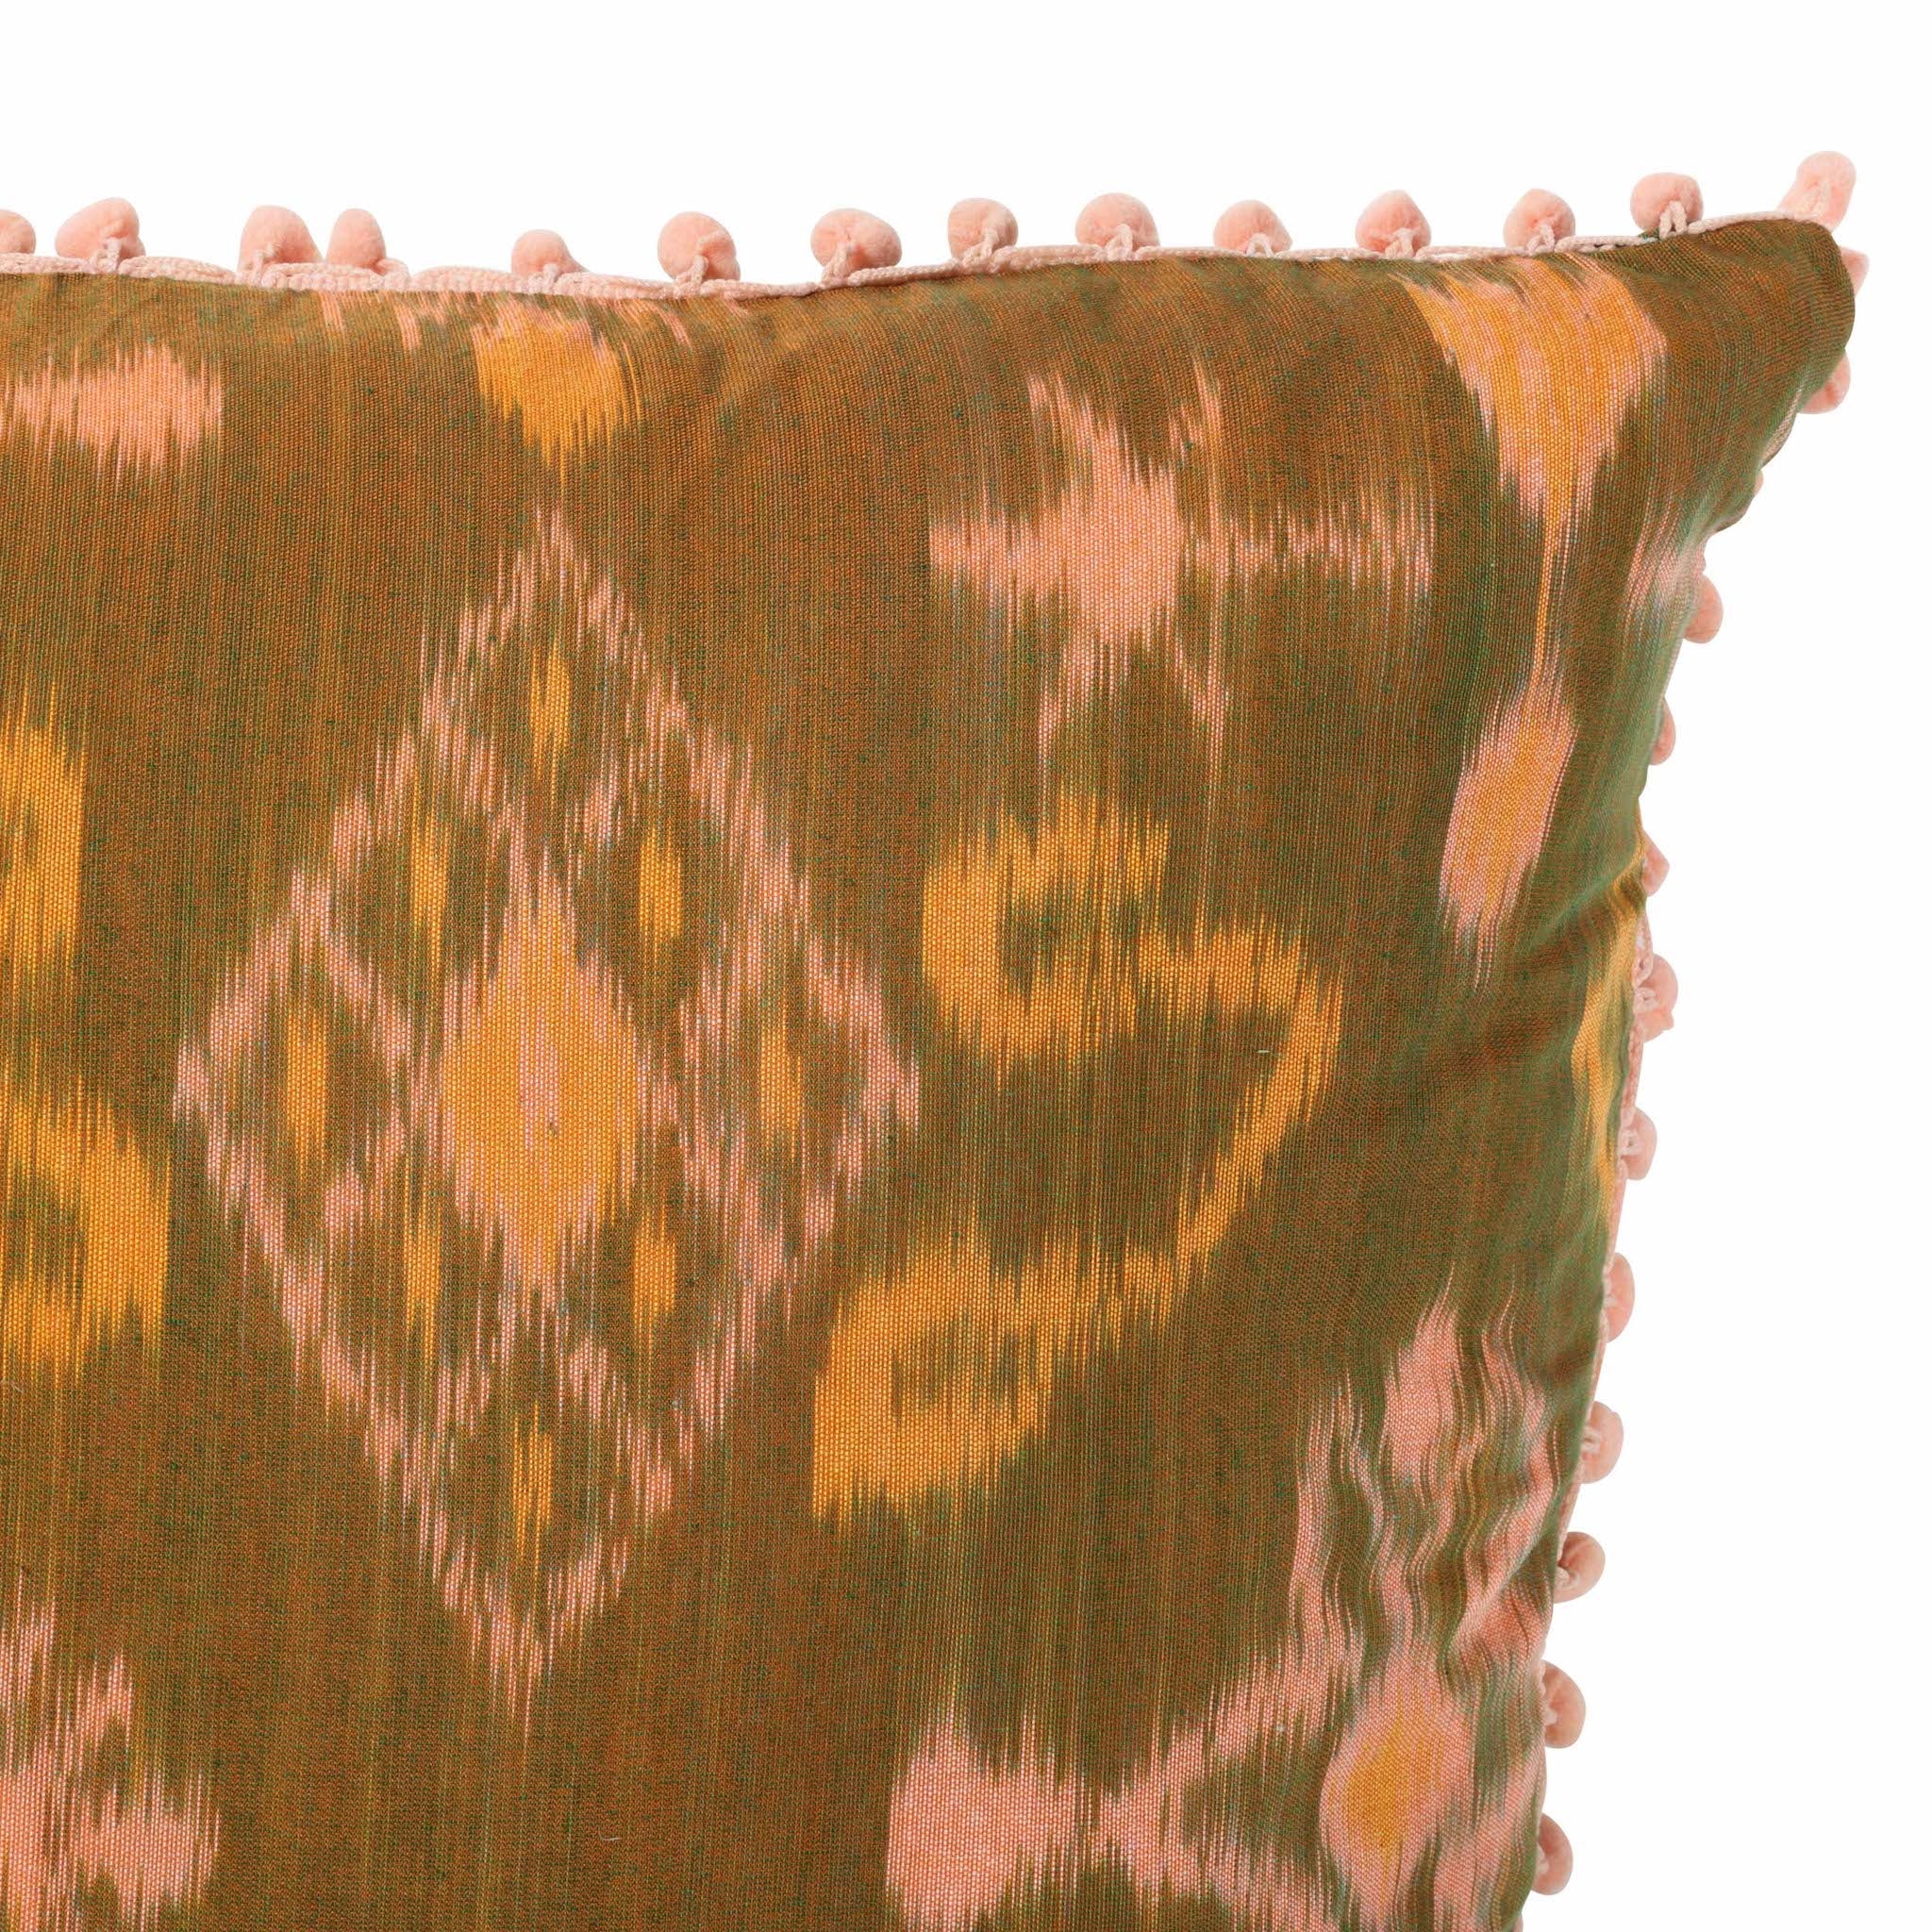 Peach and Olive Green Cotton Ikat Square Scatter Cushion with Pink PomPom Trim from Bali, Indonesia - DETAIL